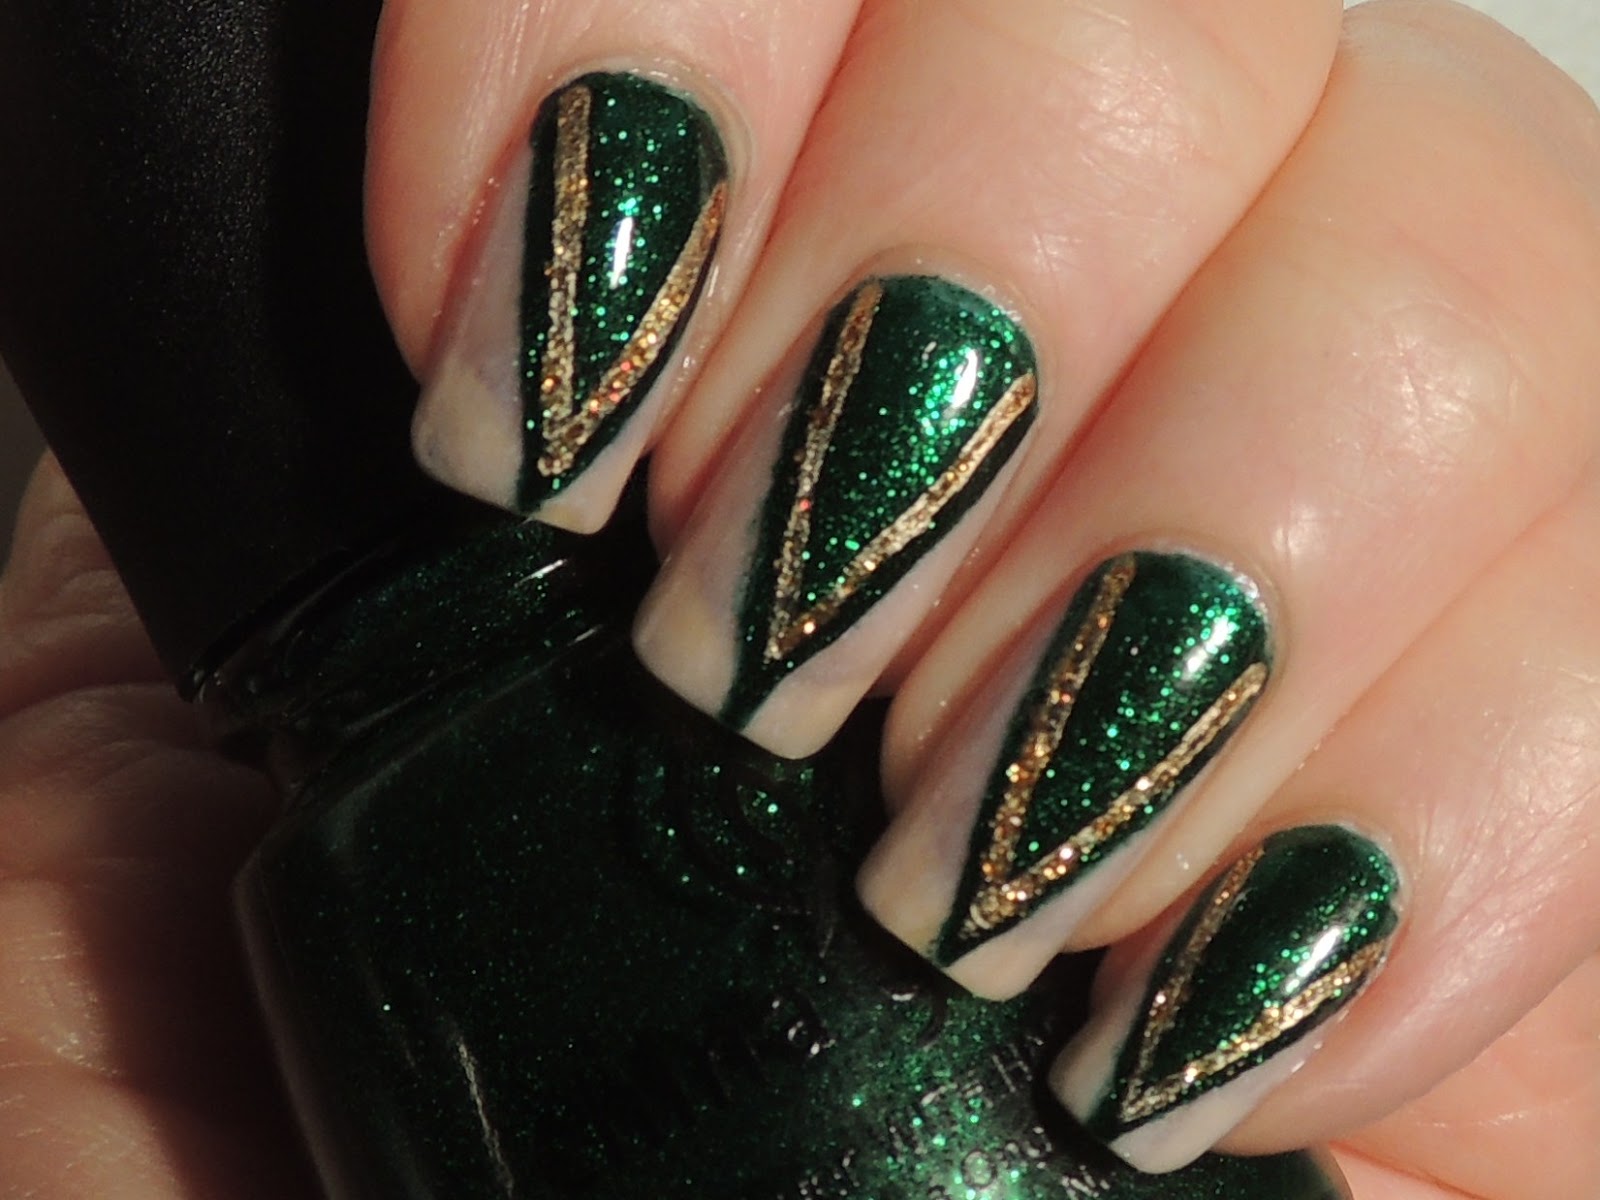 2. Emerald Green and Silver Gradient Nails - wide 4